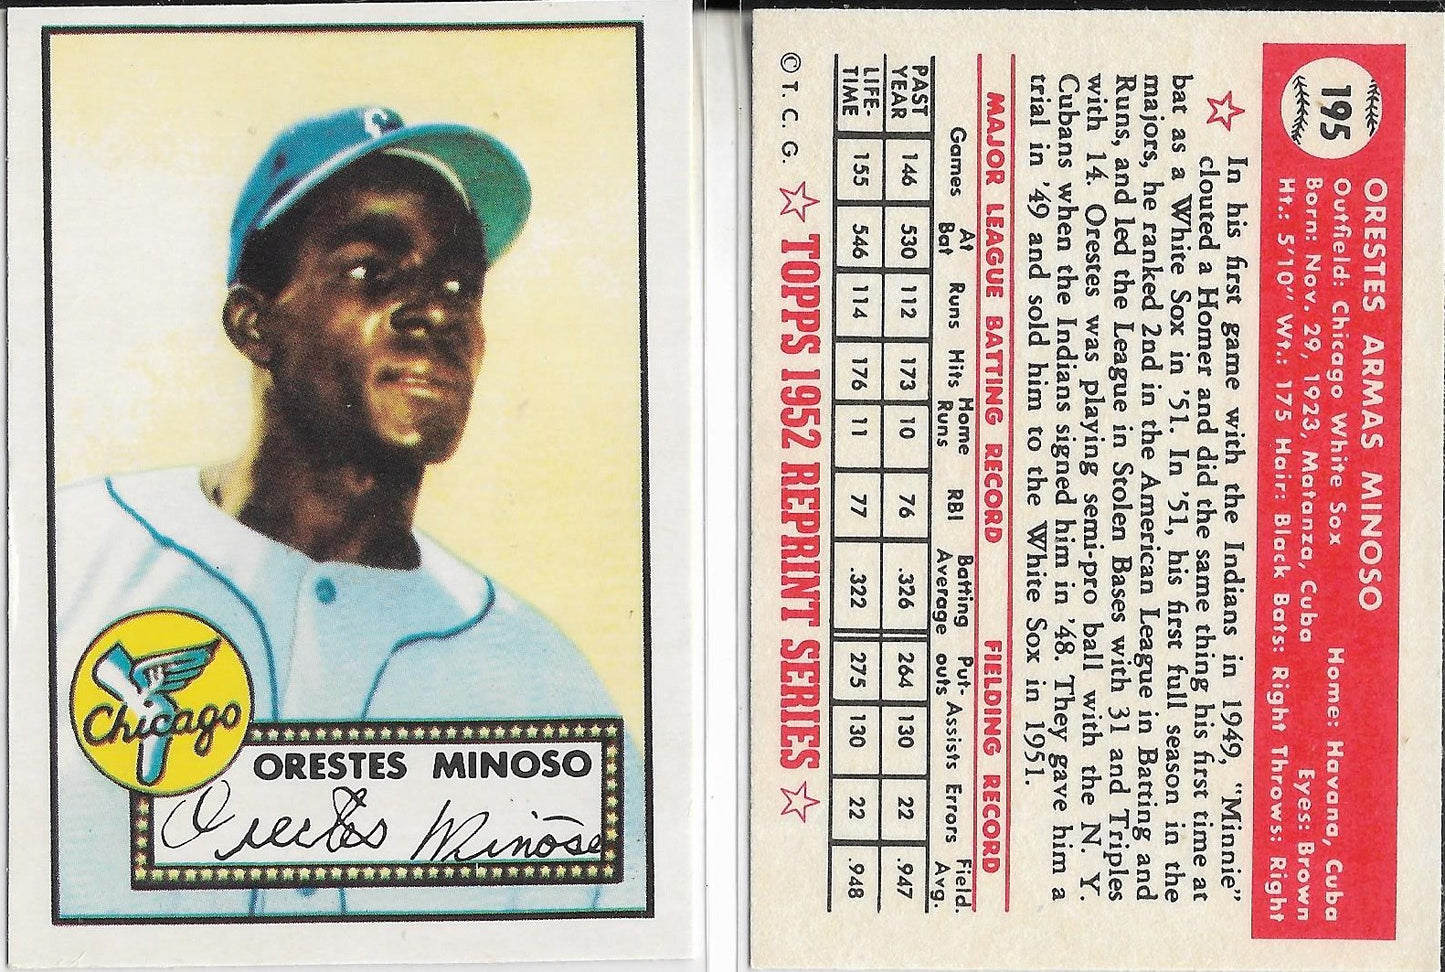 1983 TOPPS '52 REPRINT CARDS : STARS - MINNIE MINOSO - CLEVELAND INDIANS - #195 ROOKIE CARD